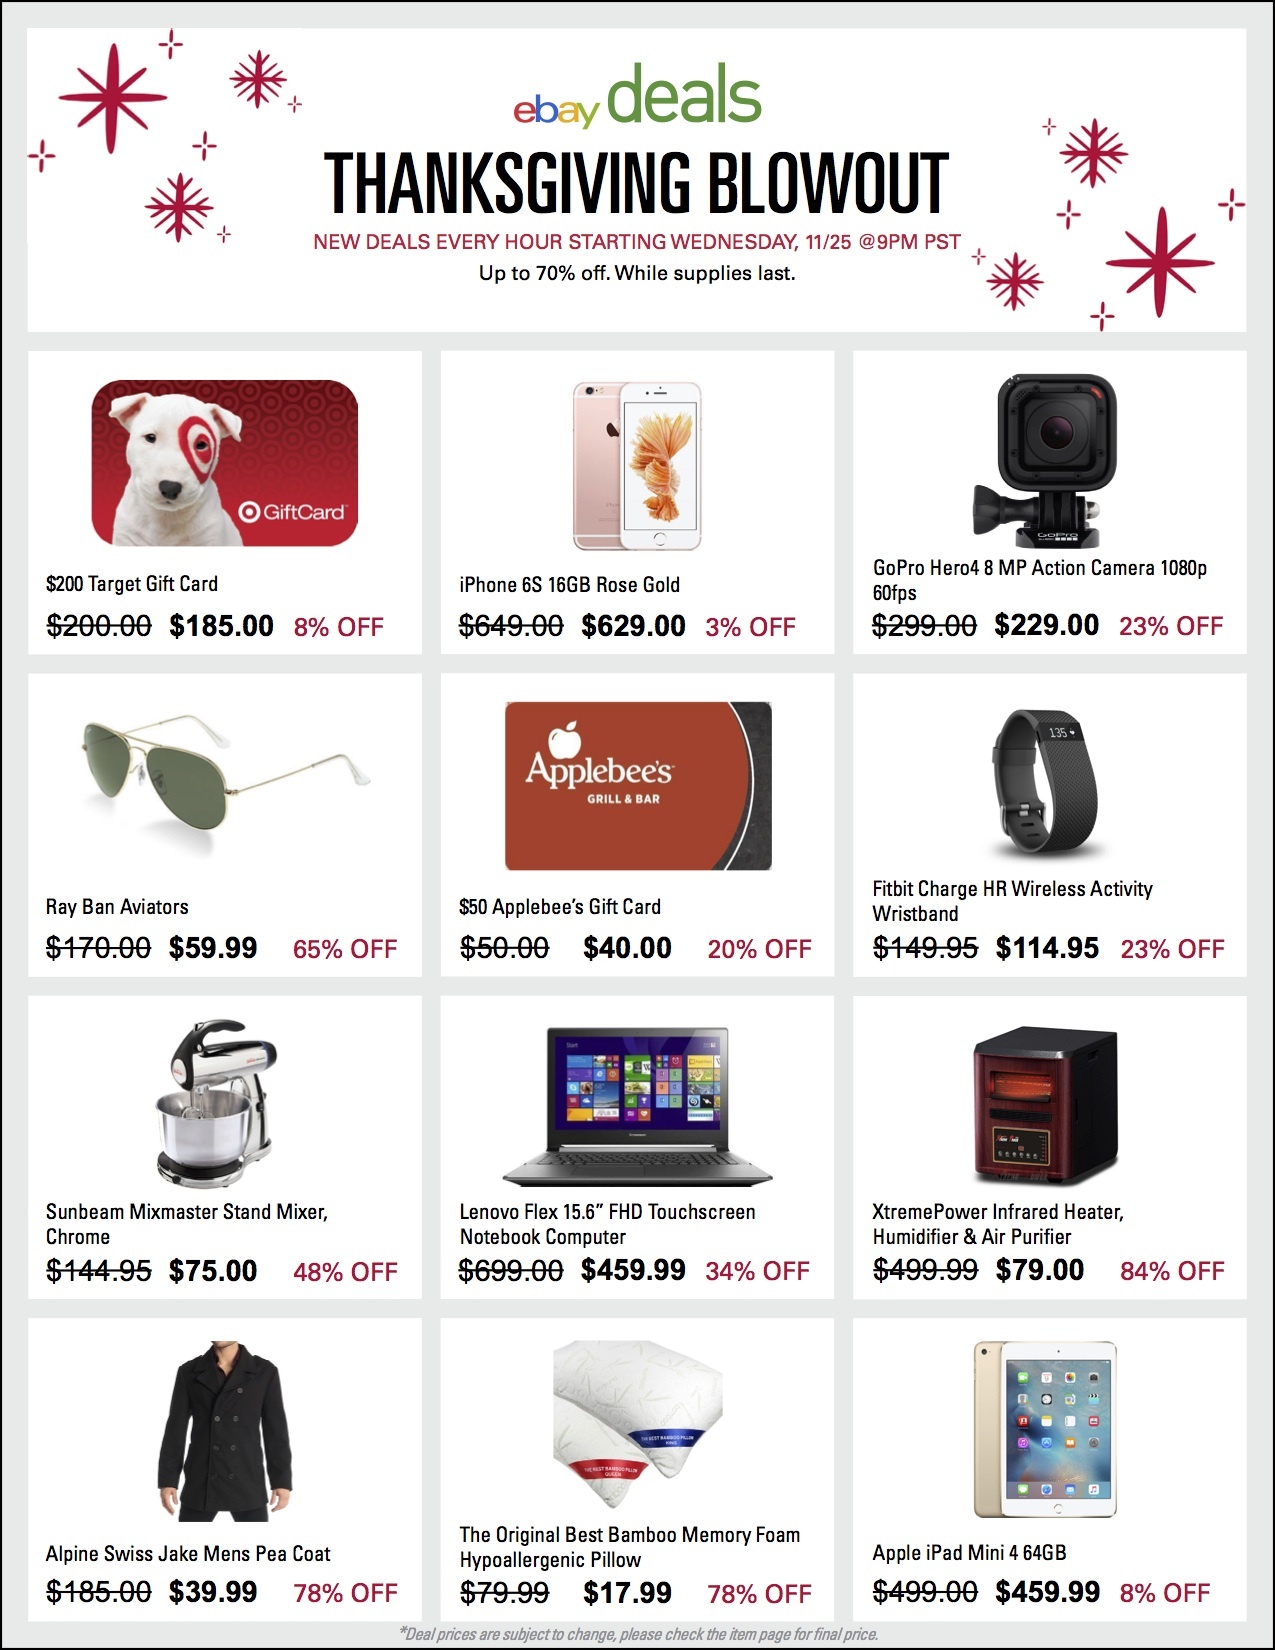 eBay Announces Deals For Thanksgiving, Black Friday And Cyber Monday